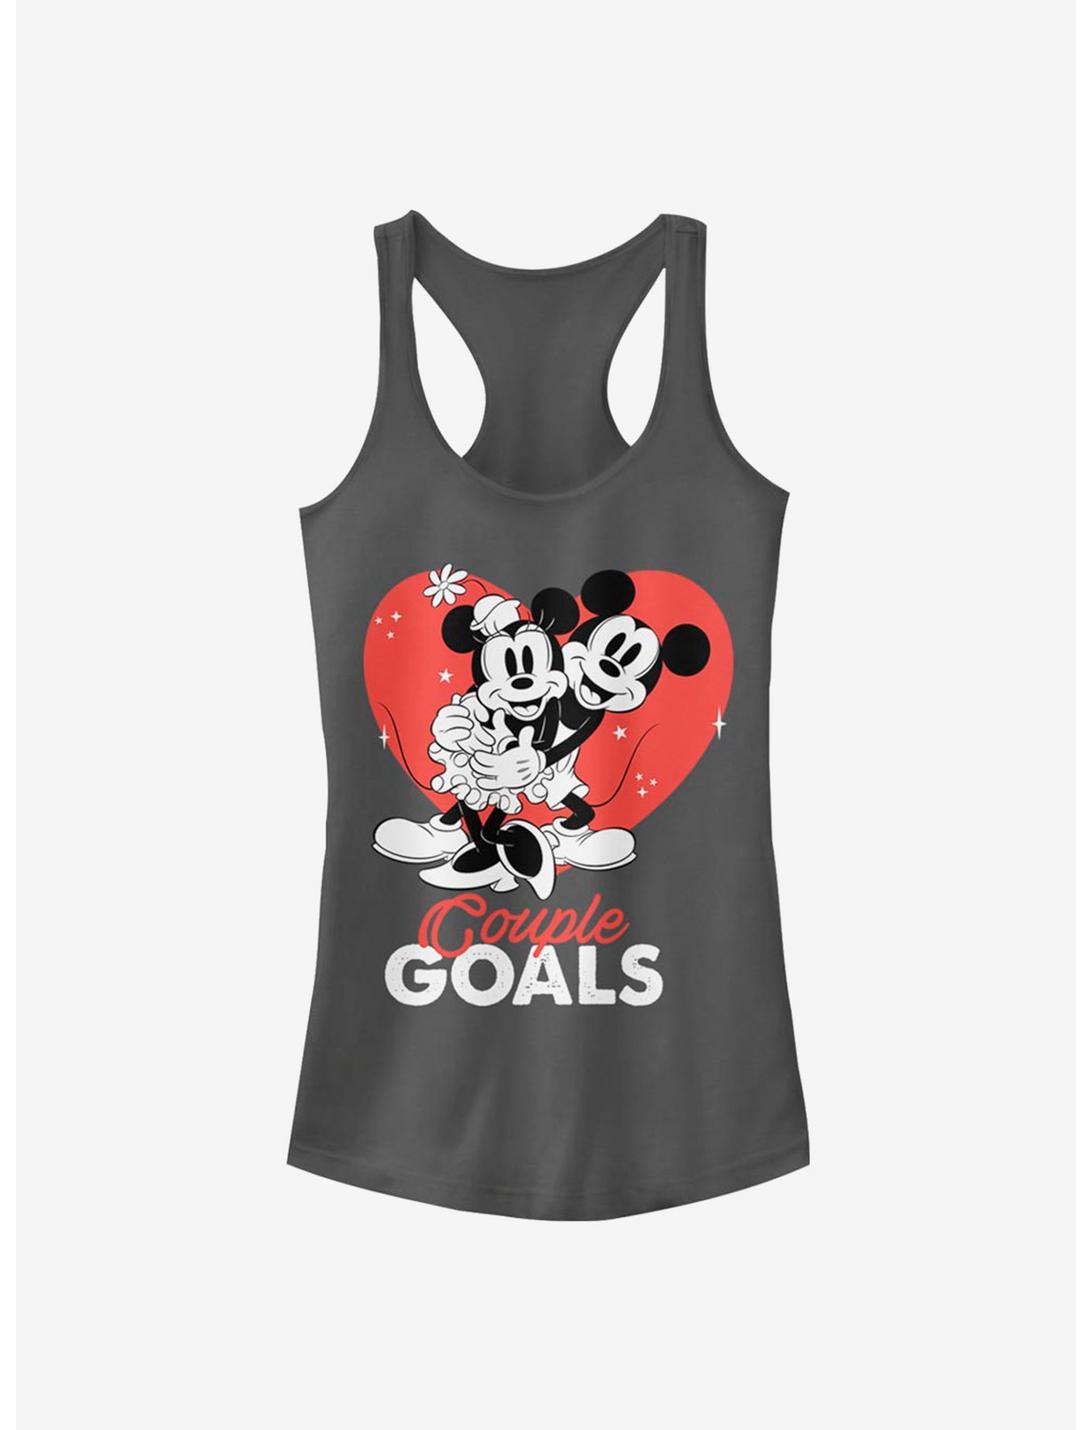 Disney Mickey Mouse & Minnie Mouse Couple Goals Girls Tank Top, CHARCOAL, hi-res